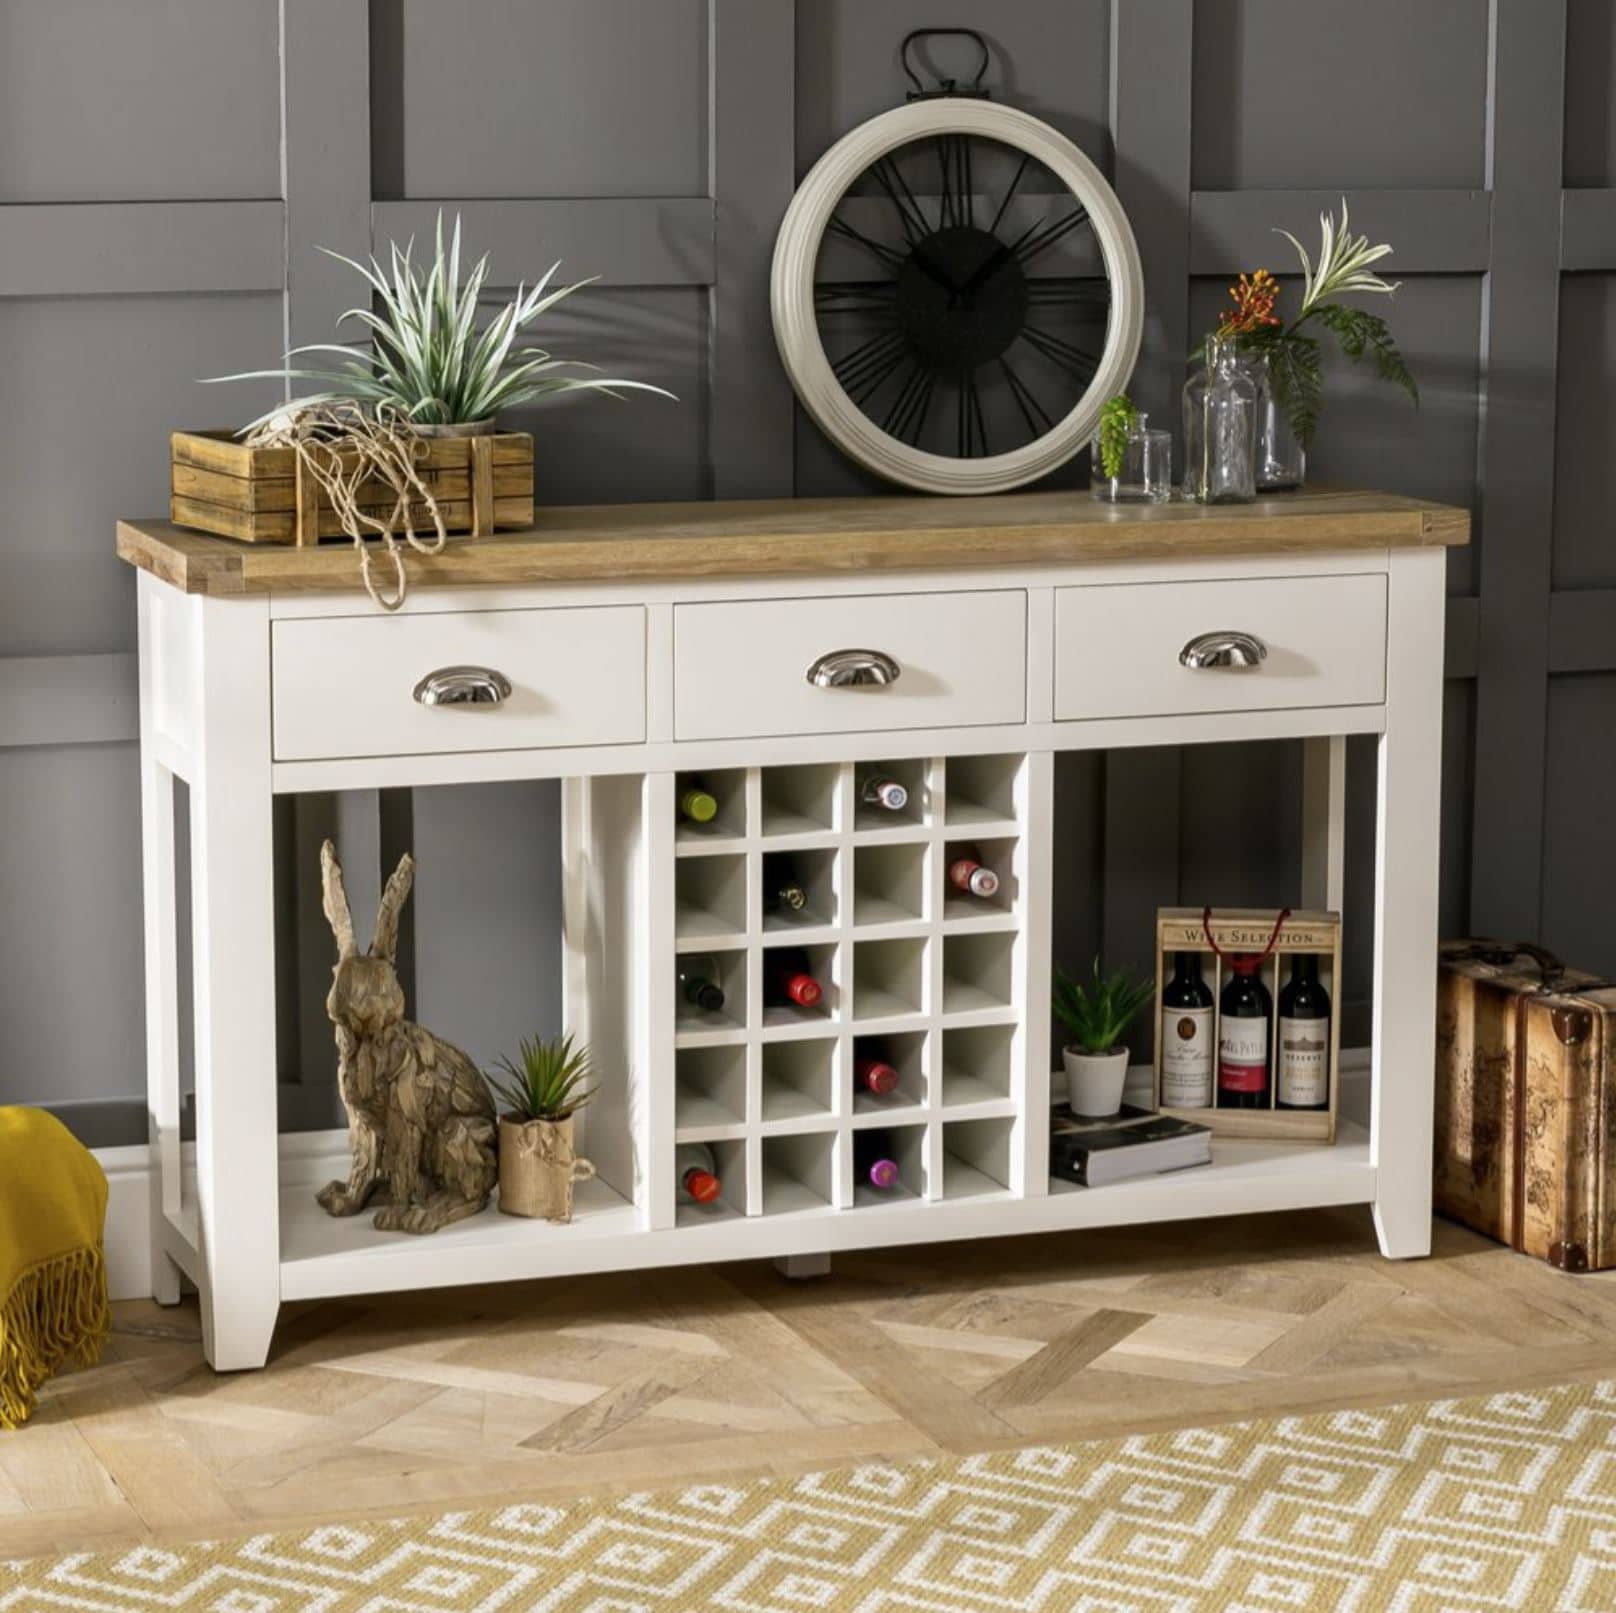 Perfect for Dinner Parties: our Stylish Cheshire Cream Buffet Sideboard with Wine Rack